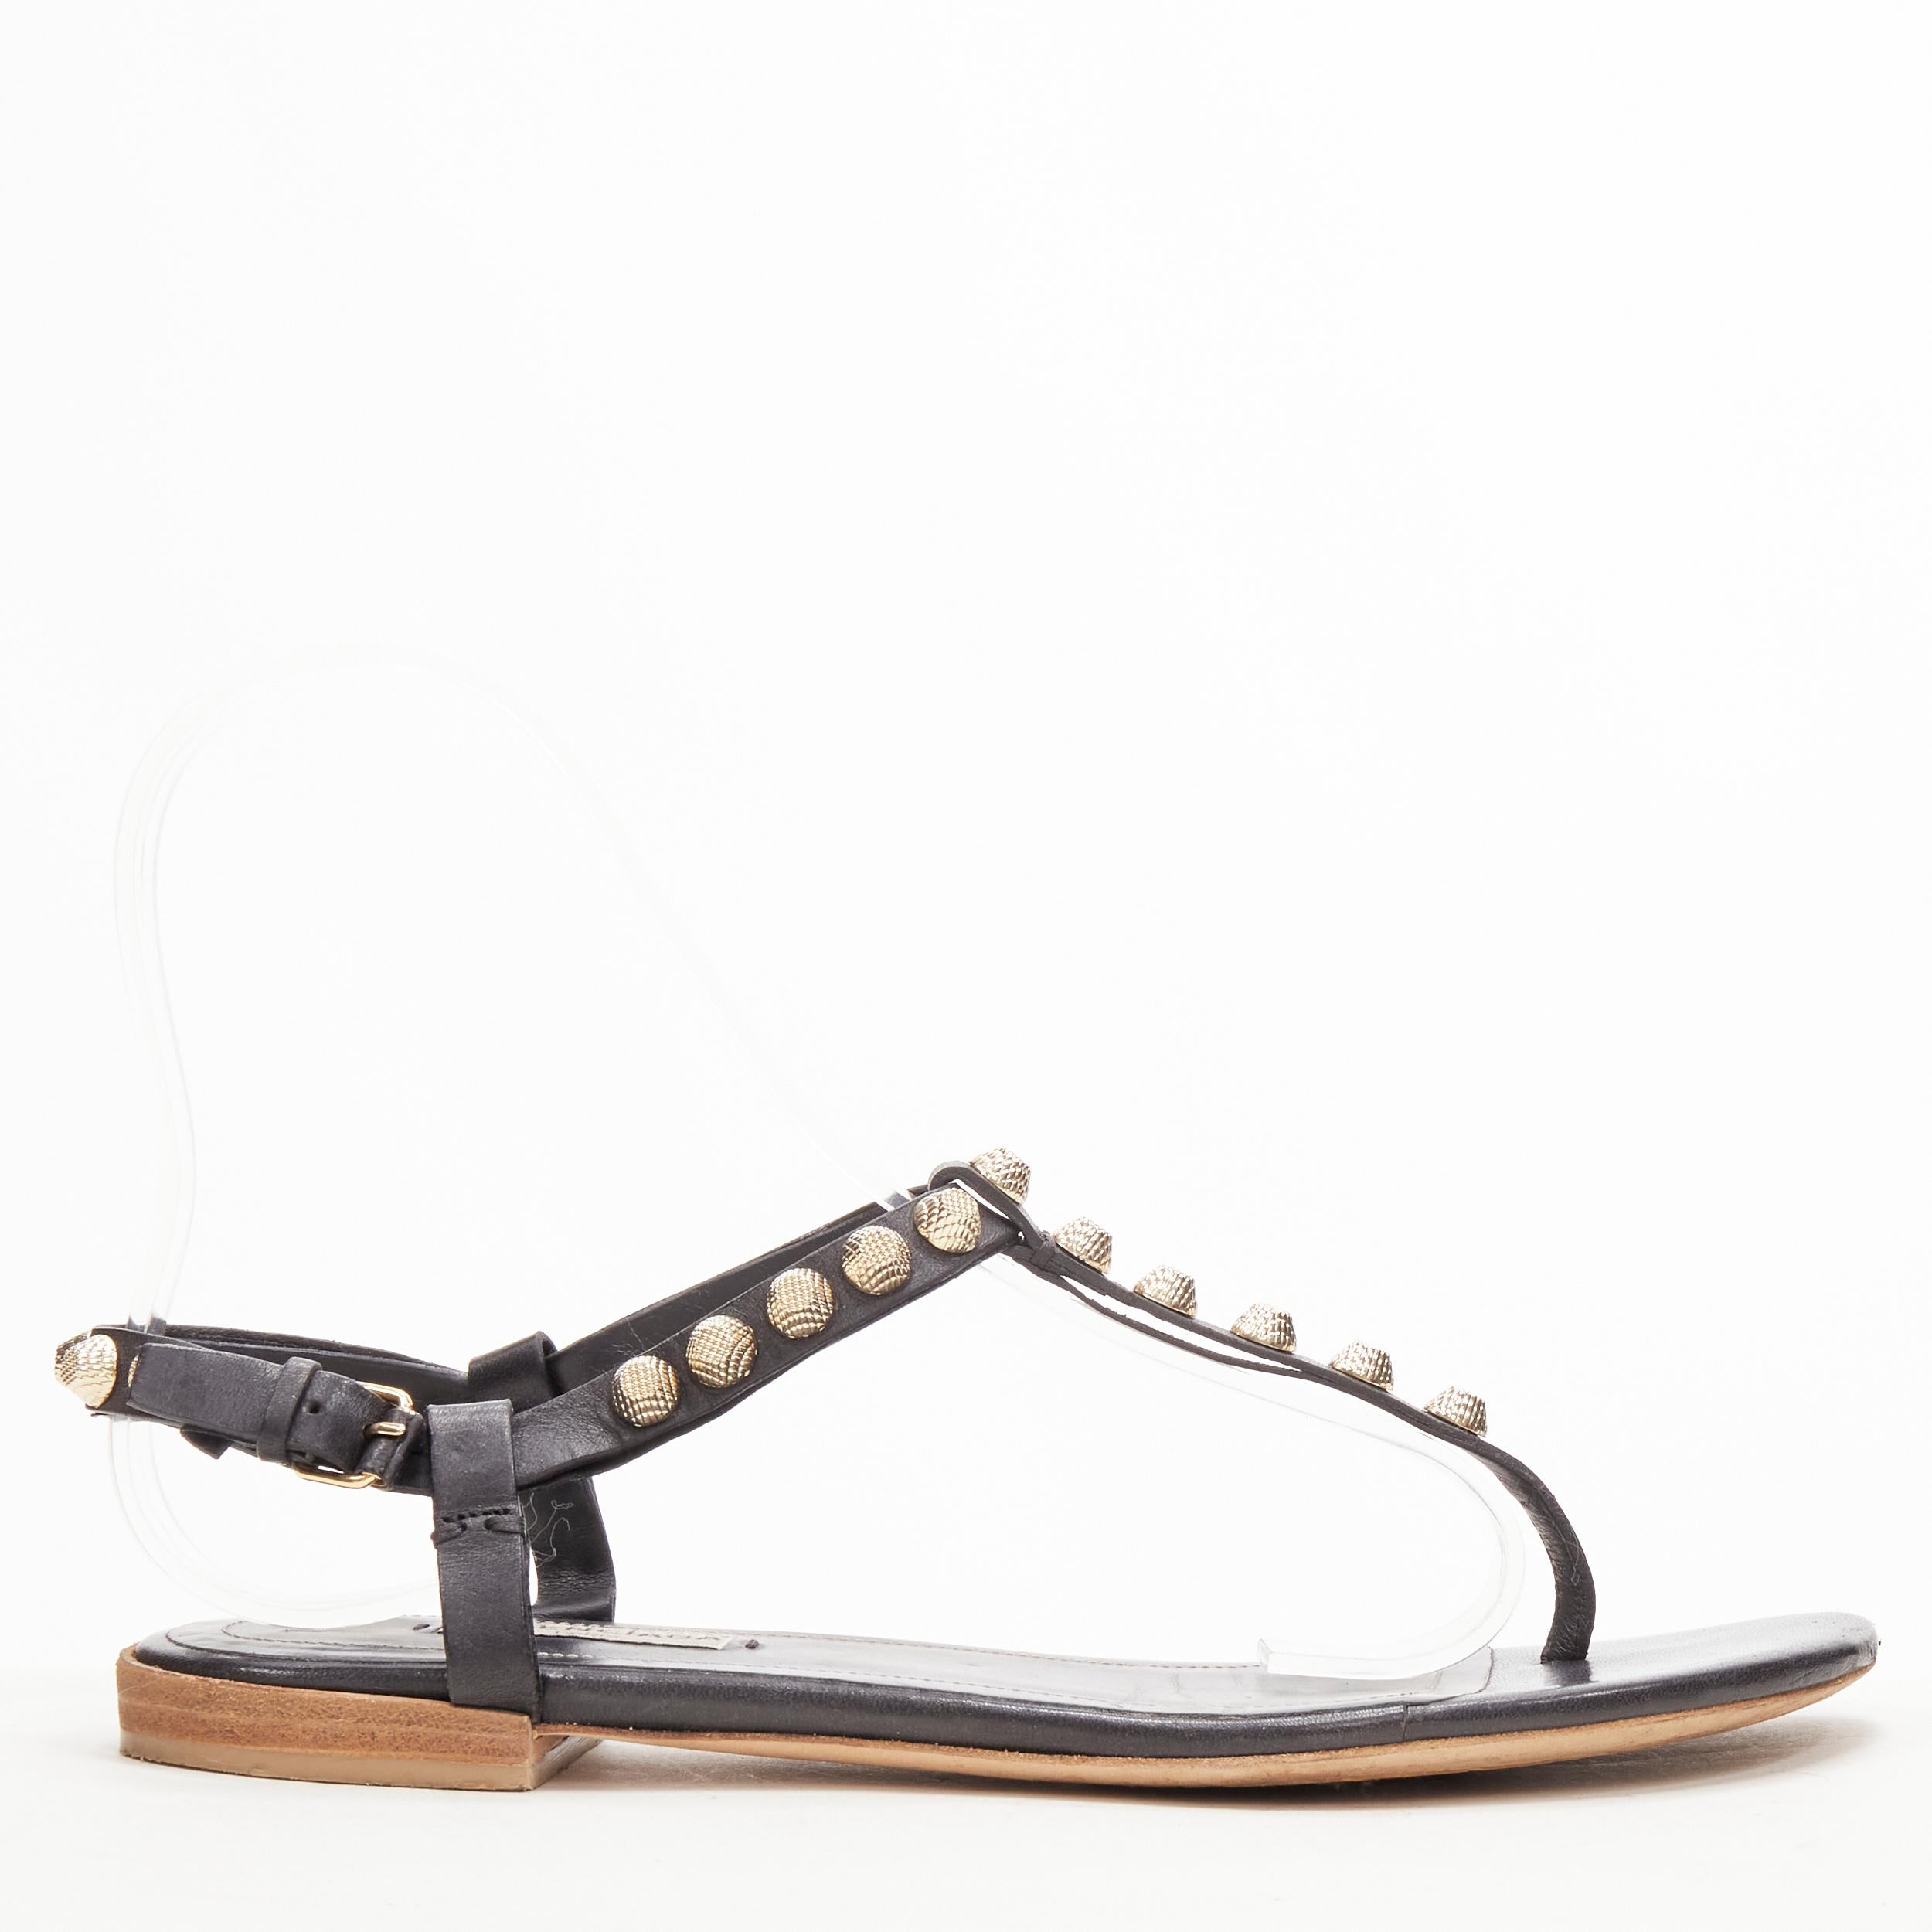 BALENCIAGA Cagole black leather gold textured  stud T-strap flat sandals EU38
Brand: Balenciaga
Material: Calfskin Leather
Color: Black
Pattern: Solid
Closure: Ankle Strap
Extra Detail: Textured gold-tone hardware. Stacked wooden heel.
Made in: